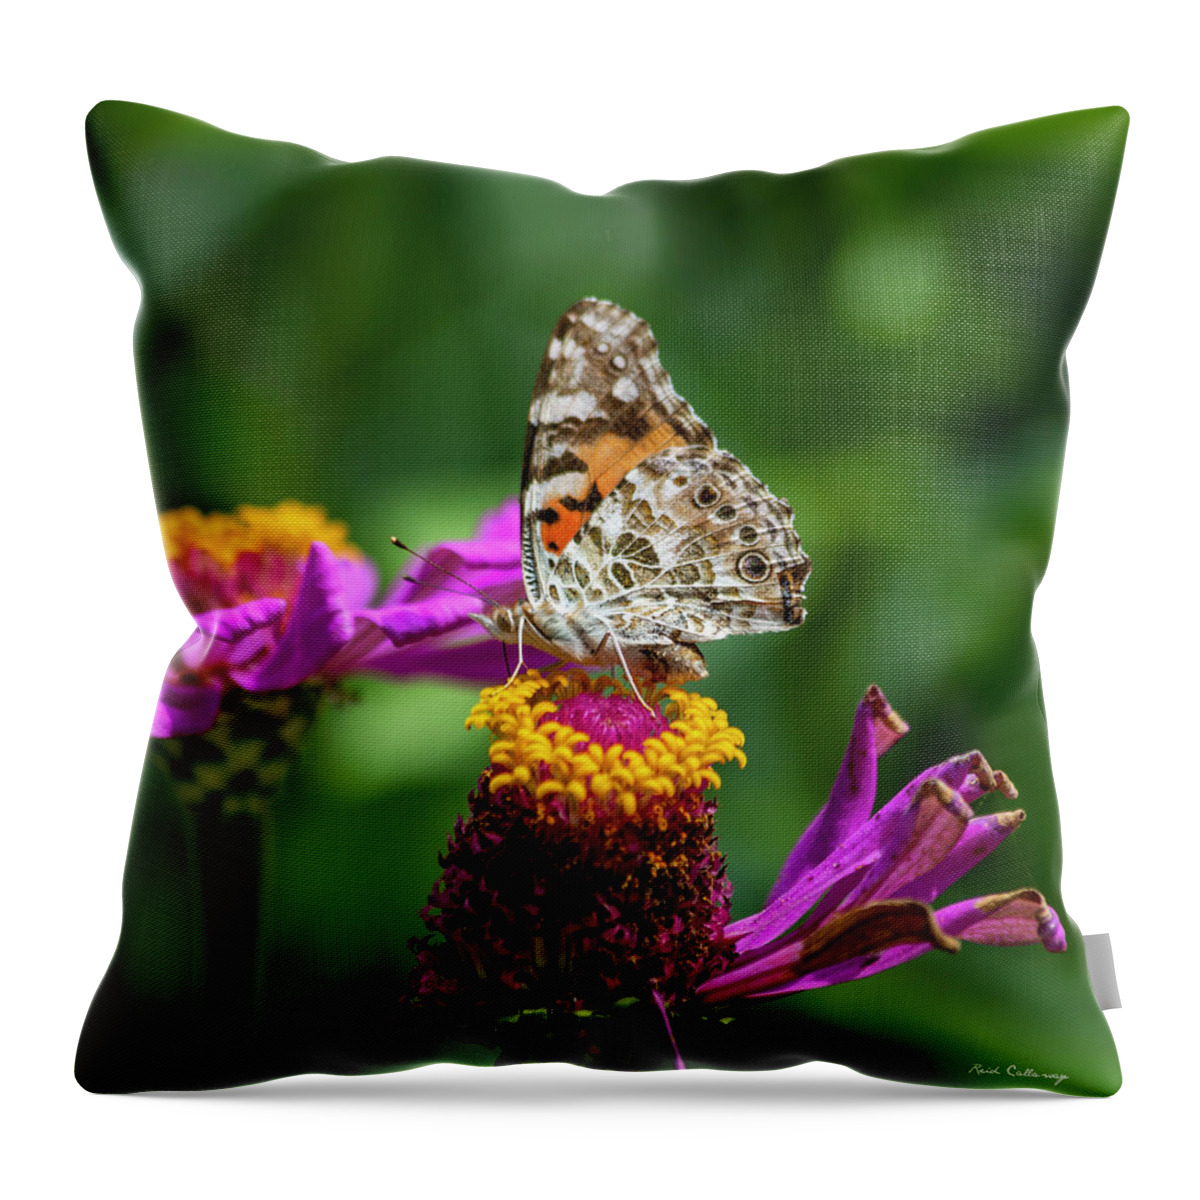 Reid Callaway Painted Lady Butterfly Images Throw Pillow featuring the photograph The Amazing Painted Lady Butterfly Garden Wildlife Art by Reid Callaway